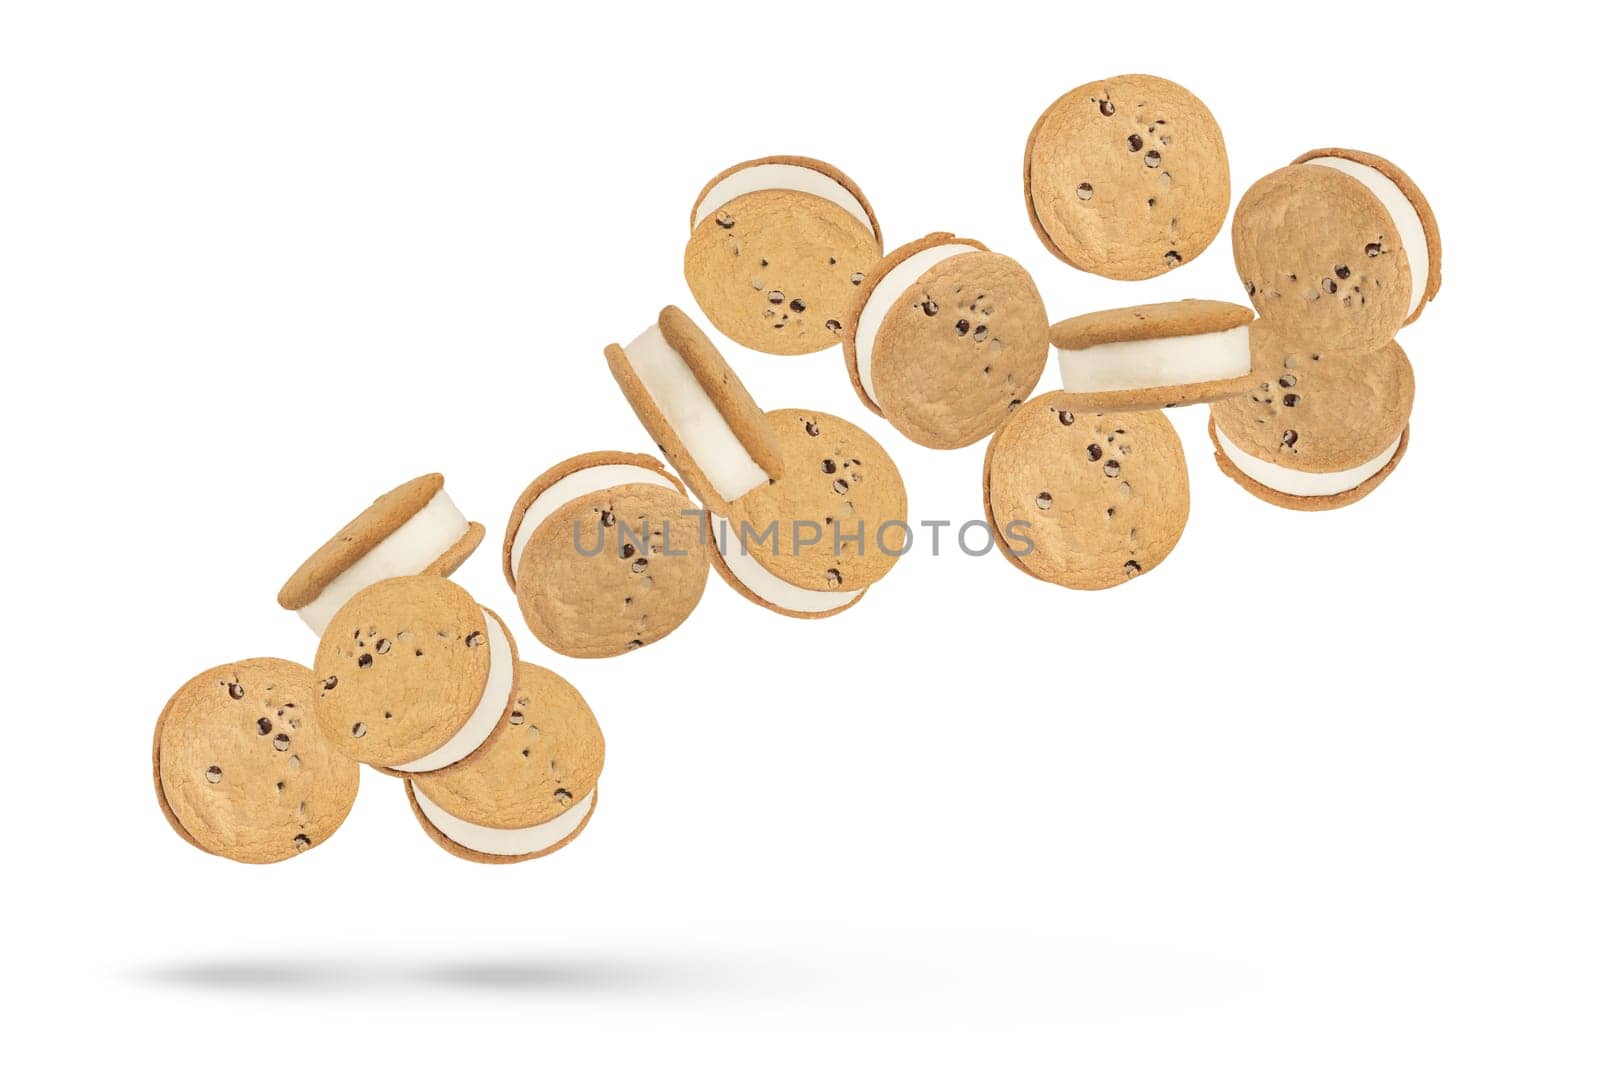 Ice cream in the form of a sandwich isolated on a white background. Vanilla ice cream scattered in different directions on a white background. Suitable for pasting into a design or project